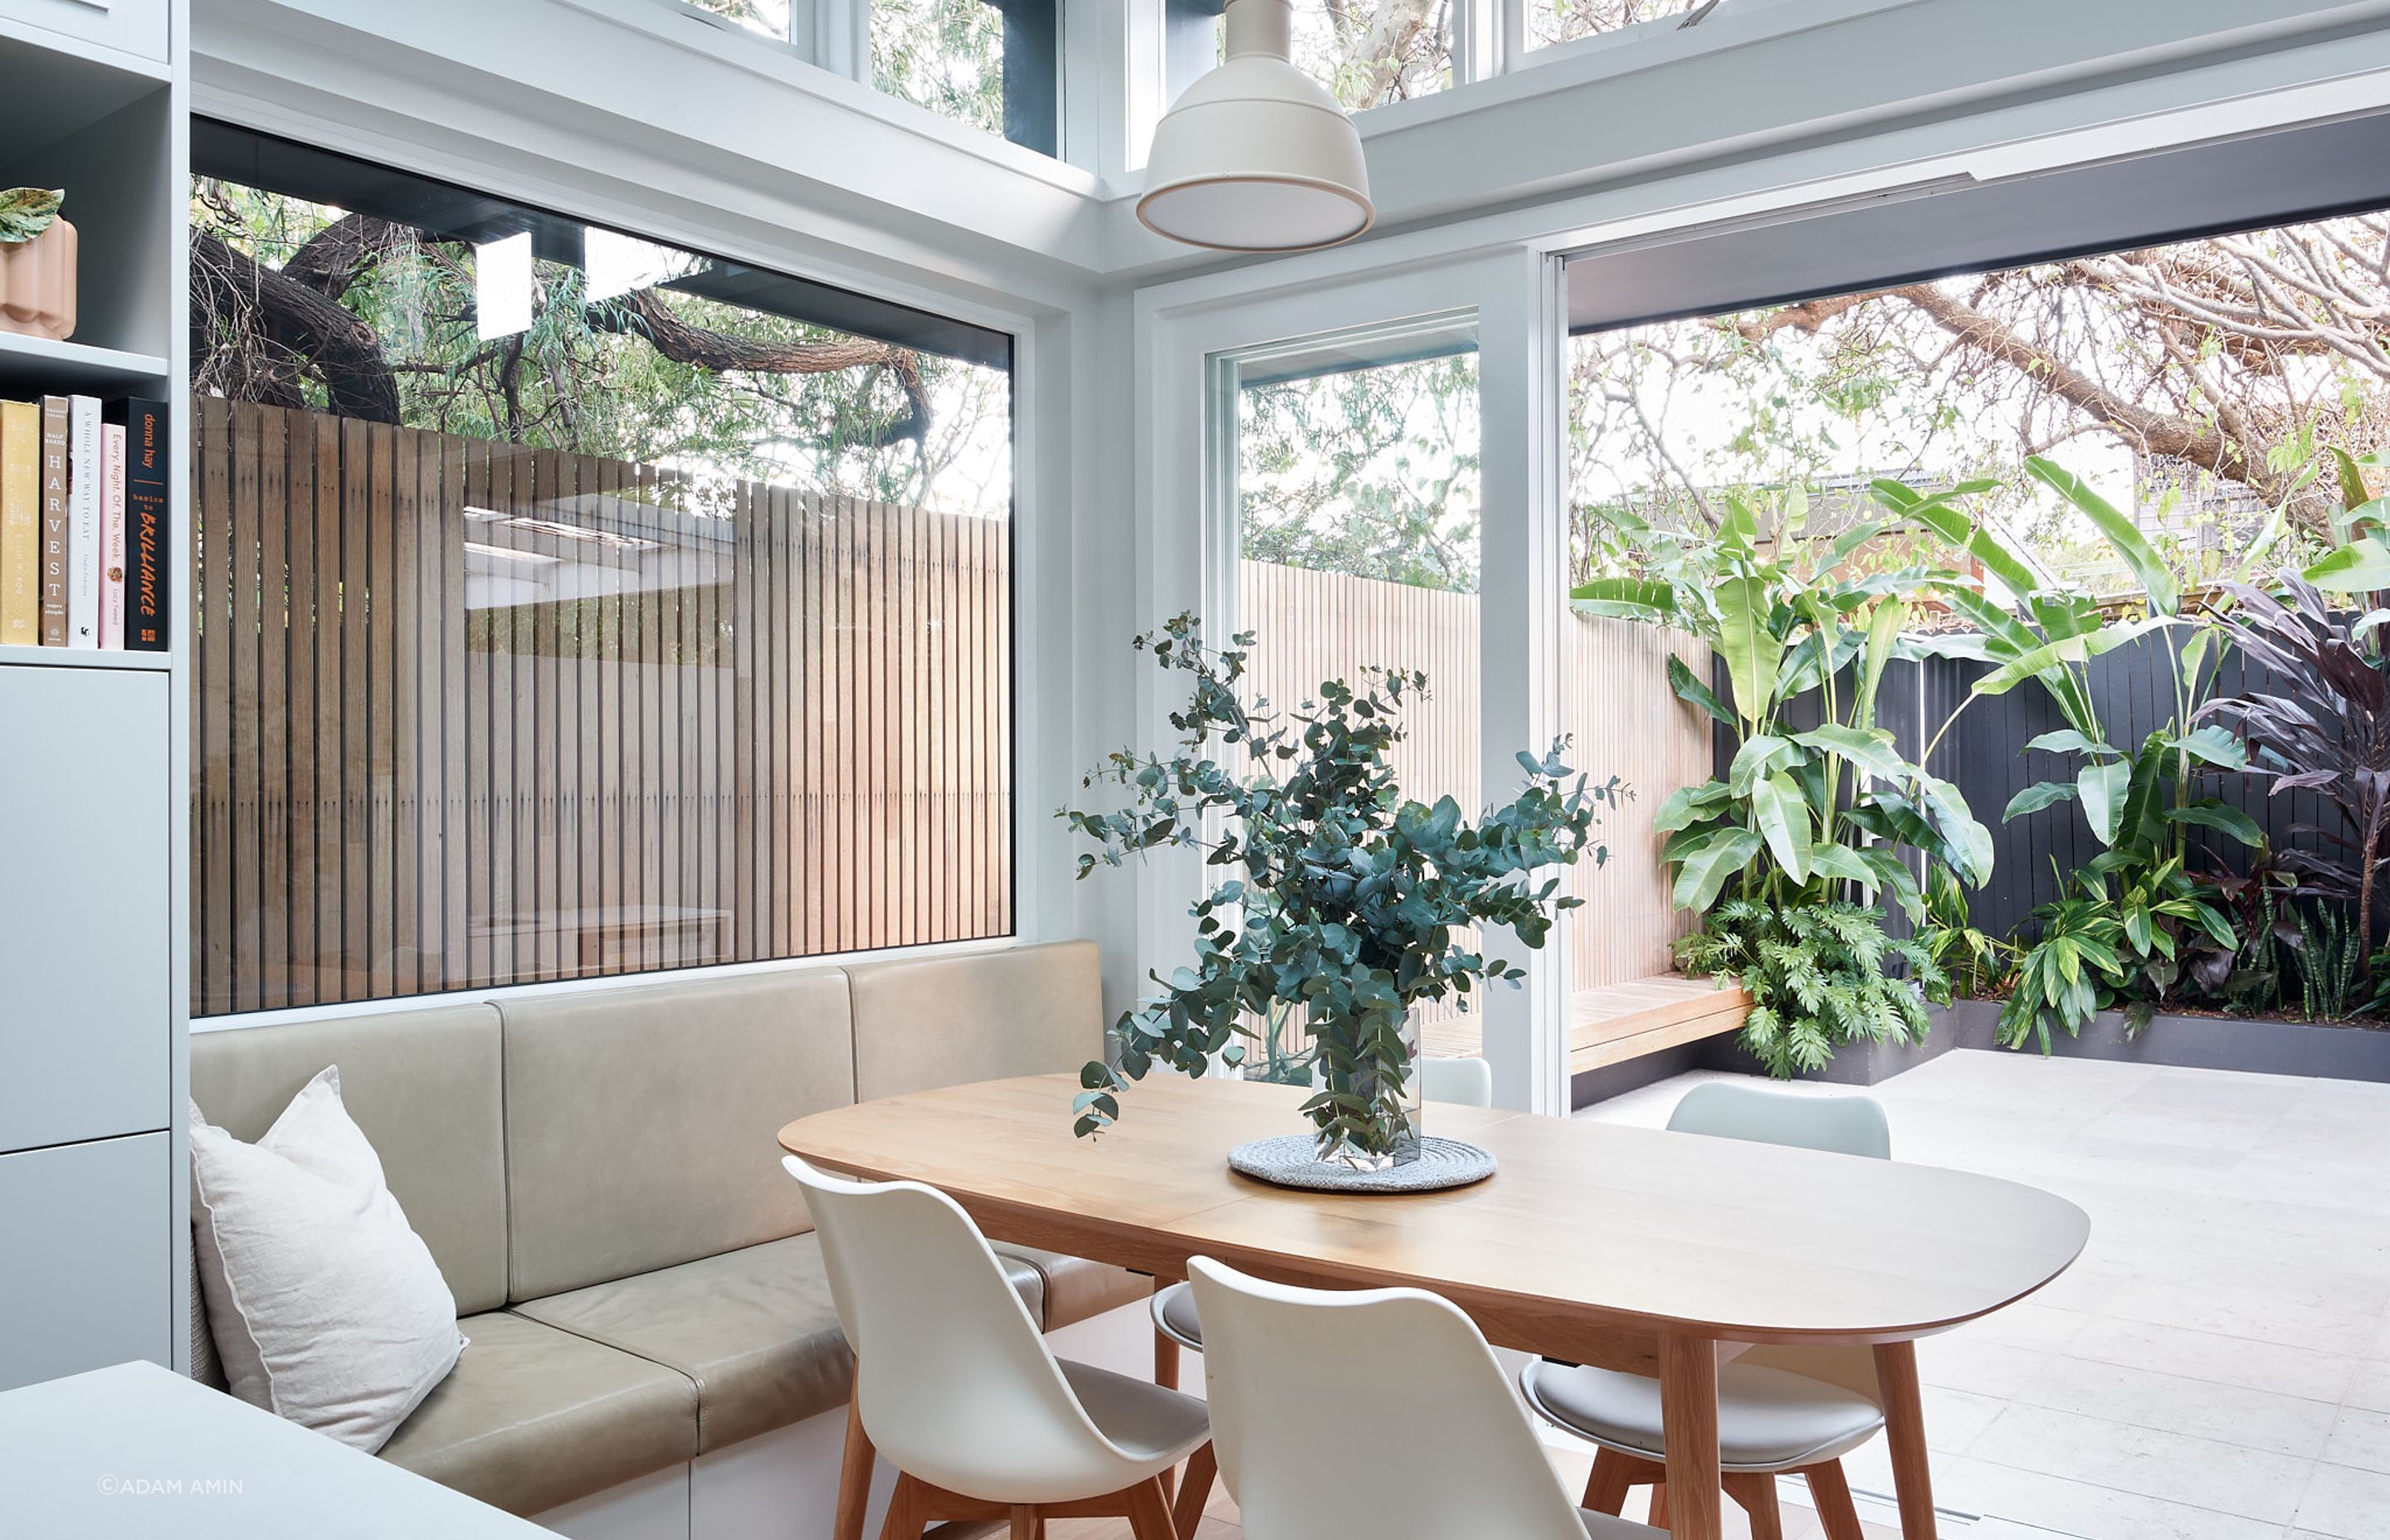 The inbuilt bench braced by the bay window above and sliding doors to the outdoor offer a casual setting for dinner with views of the surrounding vegetation.